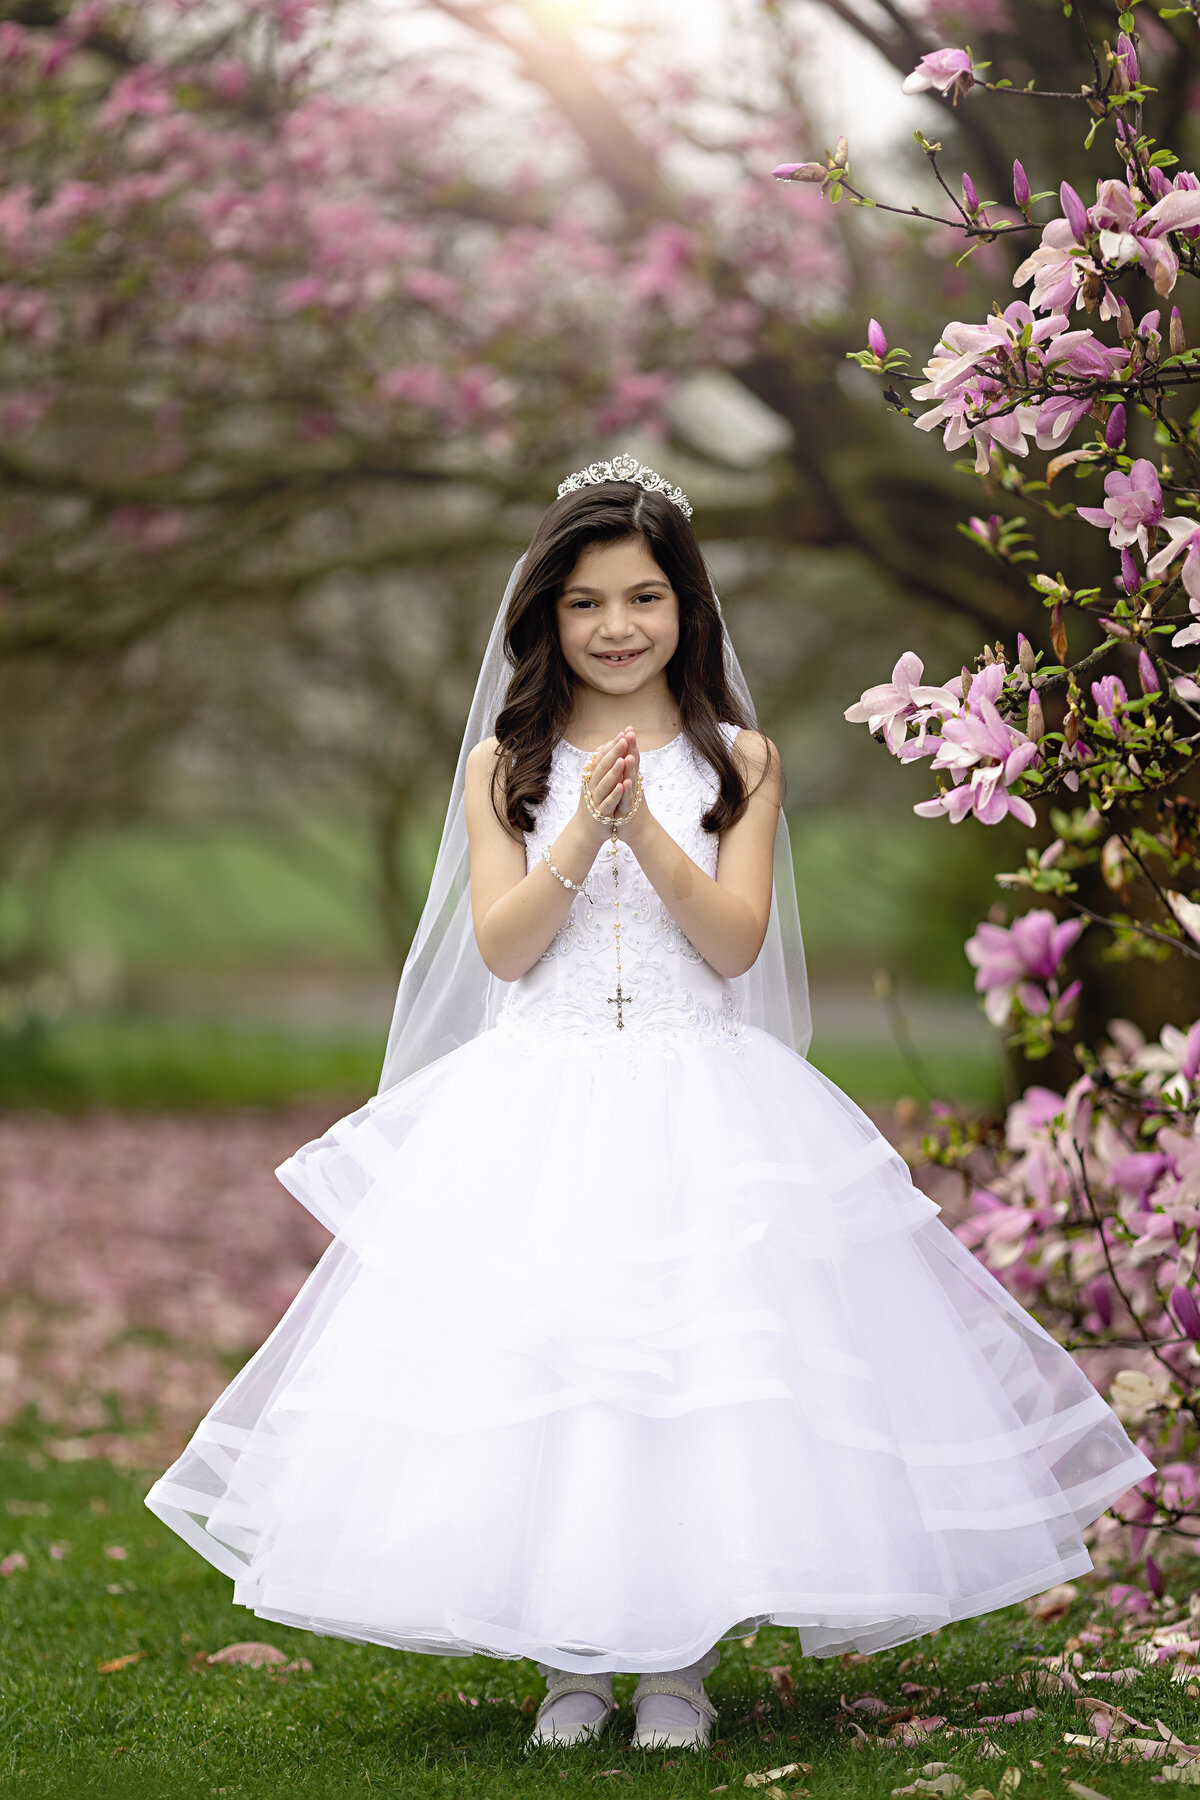 A girl in a white dress prays with some rosary beads before her communion among some pink flowering trees